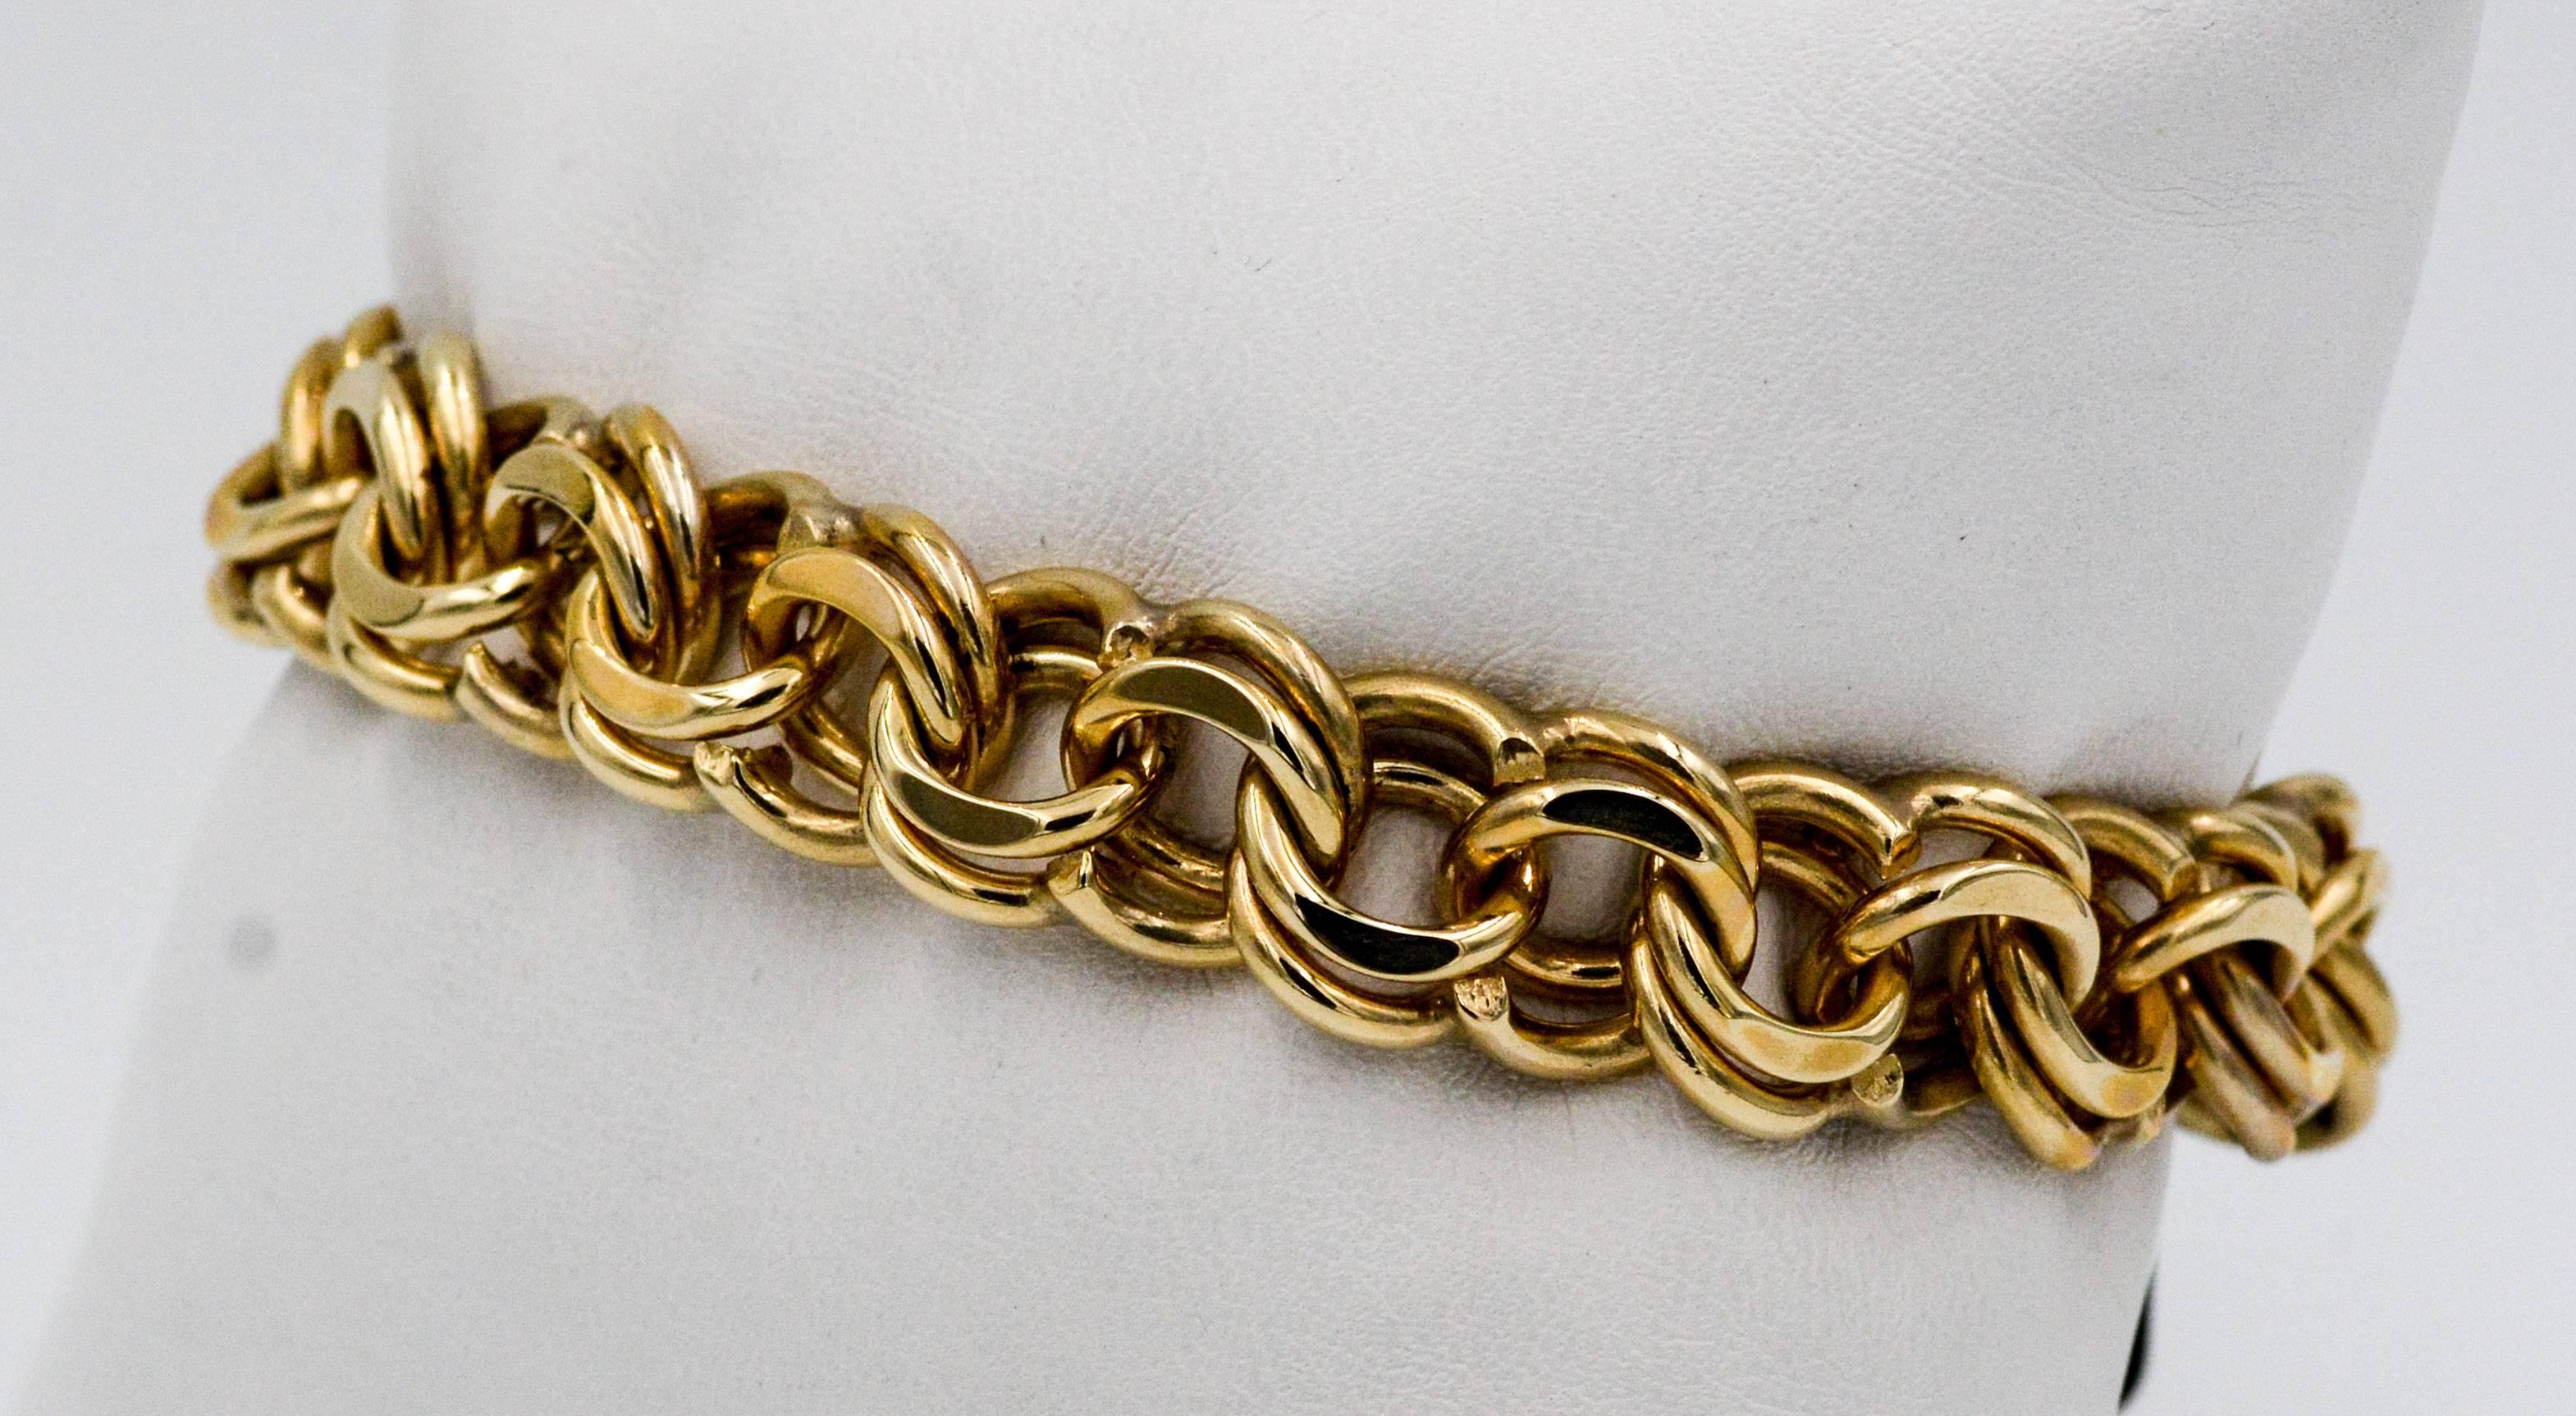 This classic 1970s 14kt yellow gold double link charm bracelet chain is 7.5 inches long and measures 11.36 mm wide.  The bracelet is clasped with the traditional tongue and box hidden clasp.  This bracelet is in excellent condition and is ready for